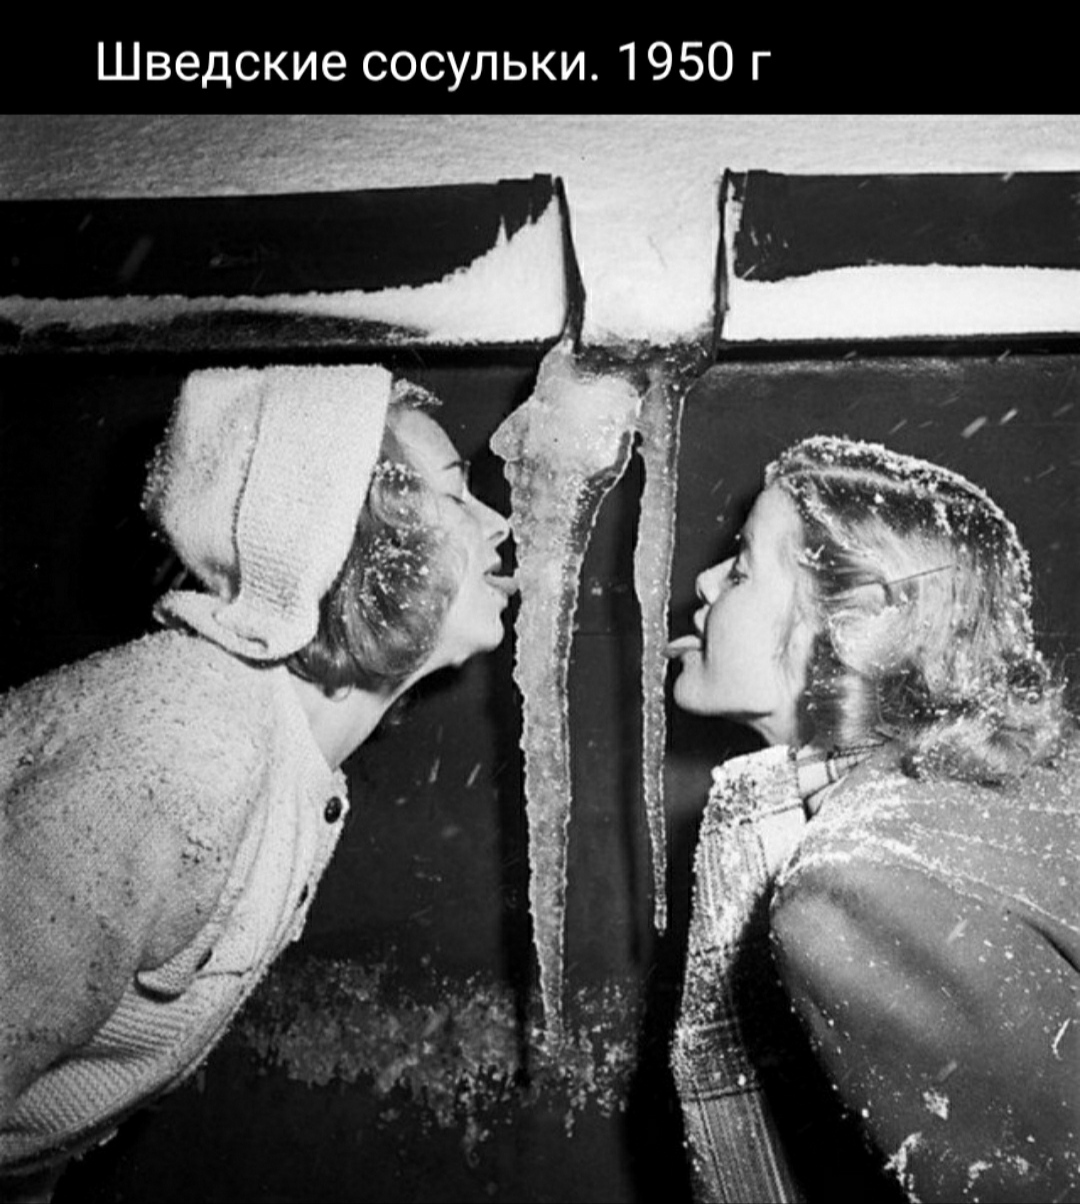 Icicles - 50th, Girls, Picture with text, Black and white photo, Old photo, The photo